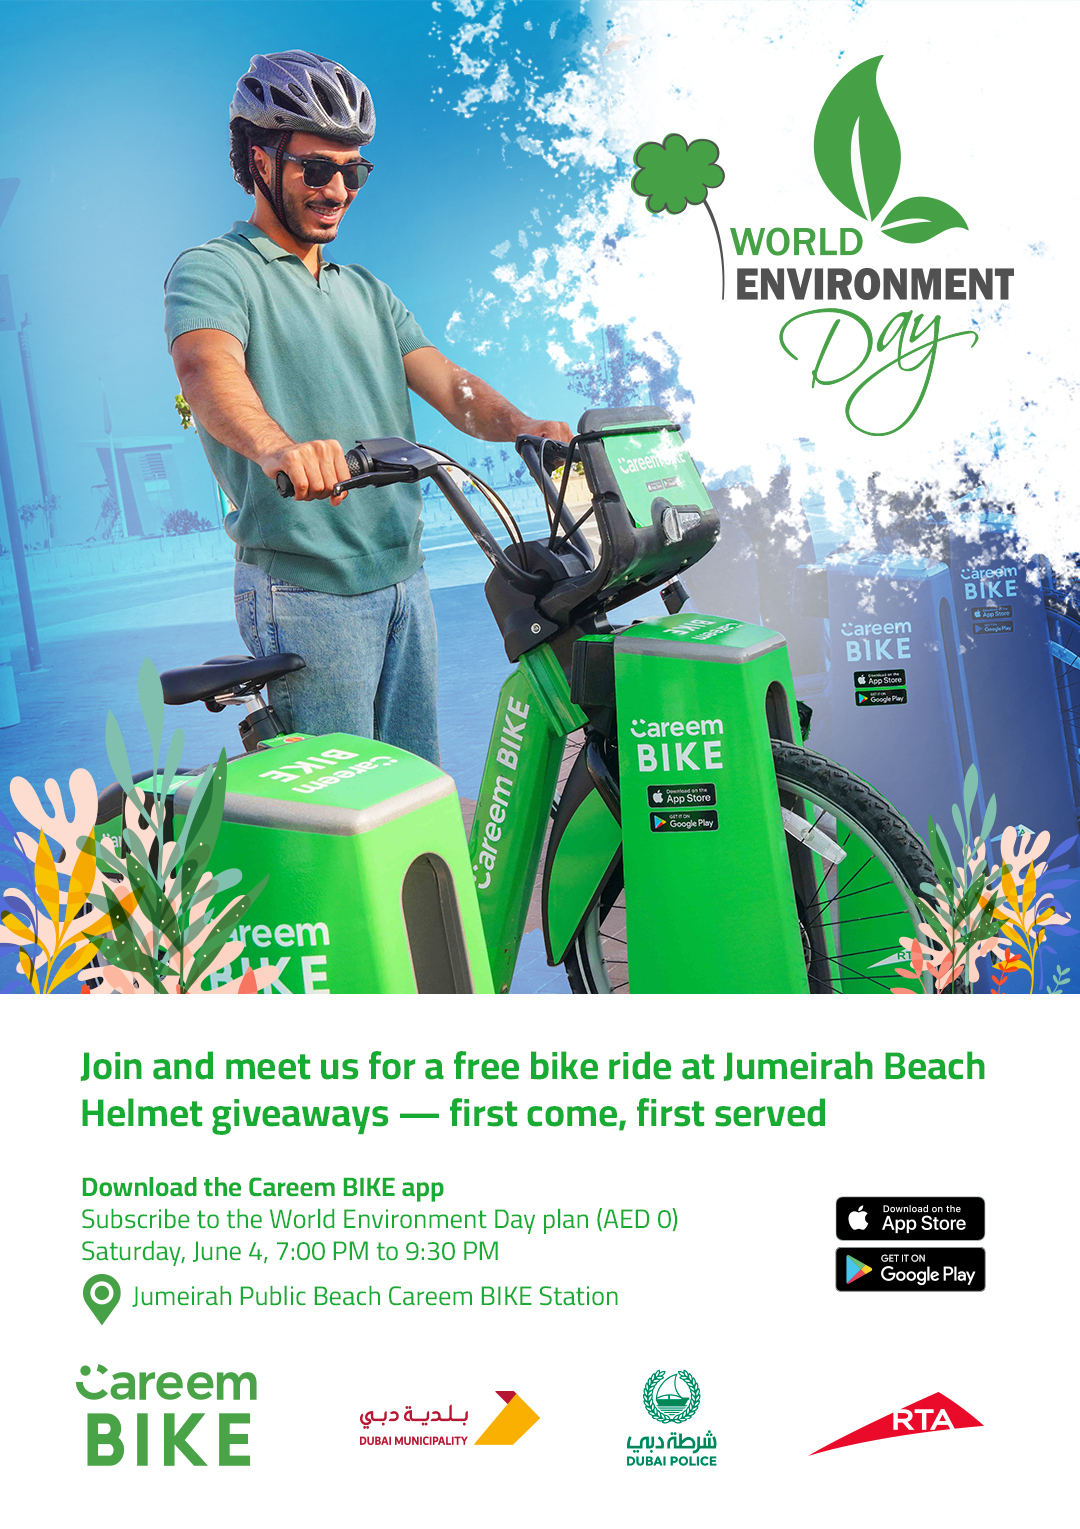 Image for Careem Celebrates “World Environment Day” By Offering Free Electric Pedal-Assisted Bike Rides In Dubai